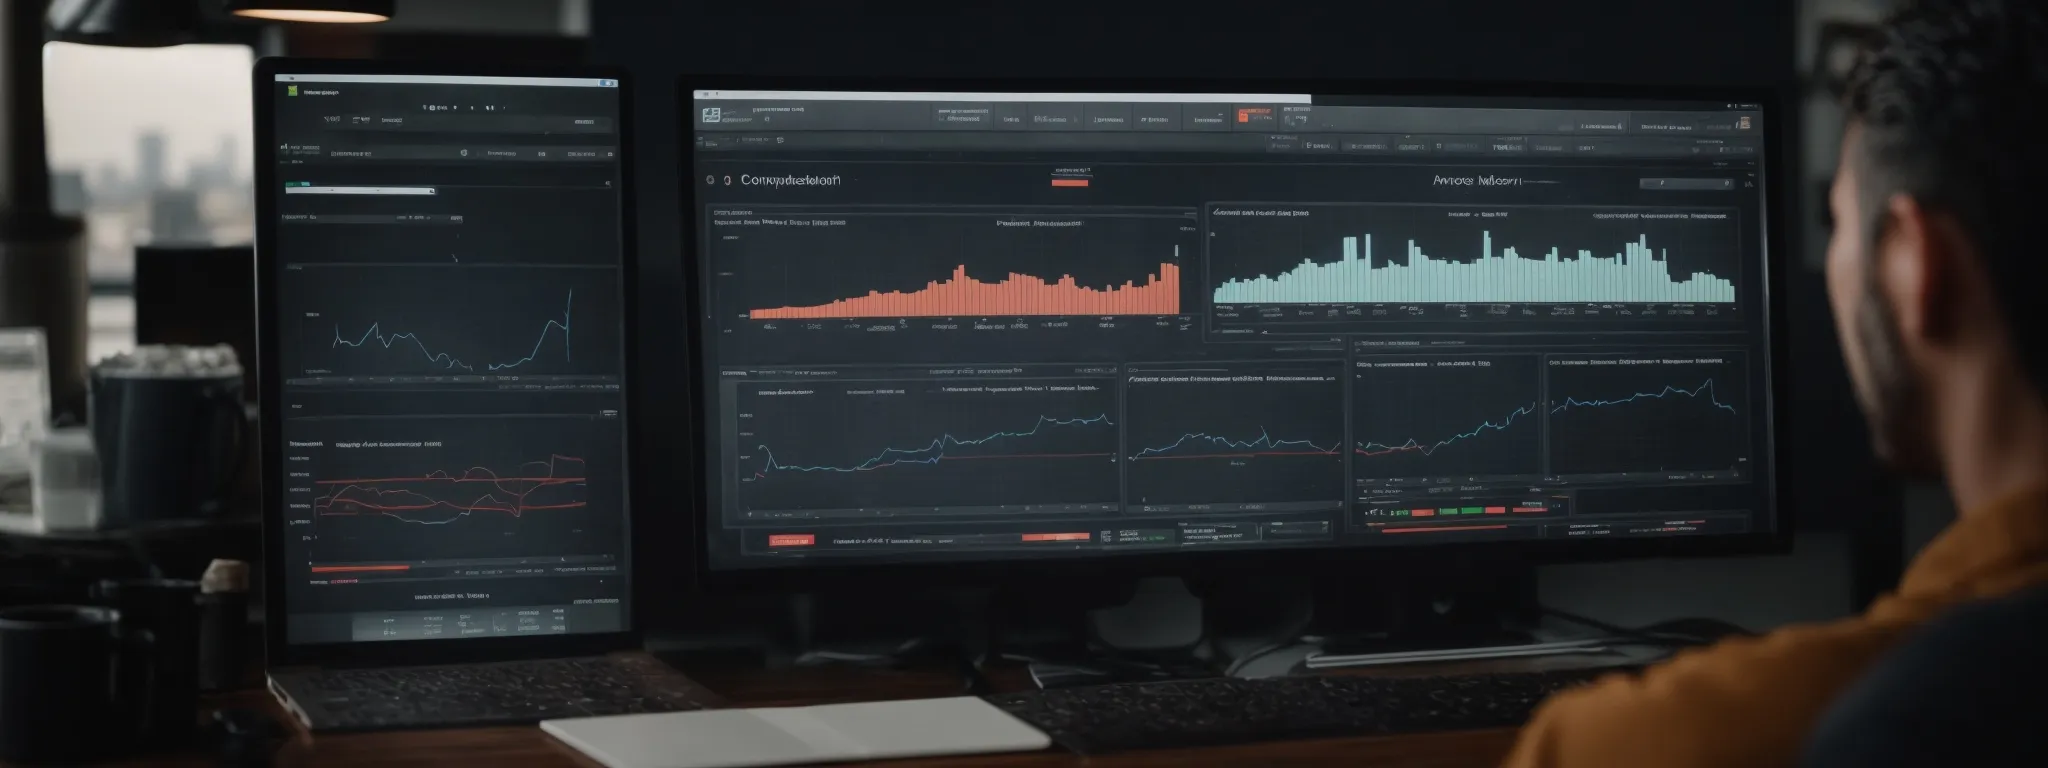 a computer screen displaying analytics dashboards with graphs and traffic data while a marketing professional reviews the seo performance metrics.